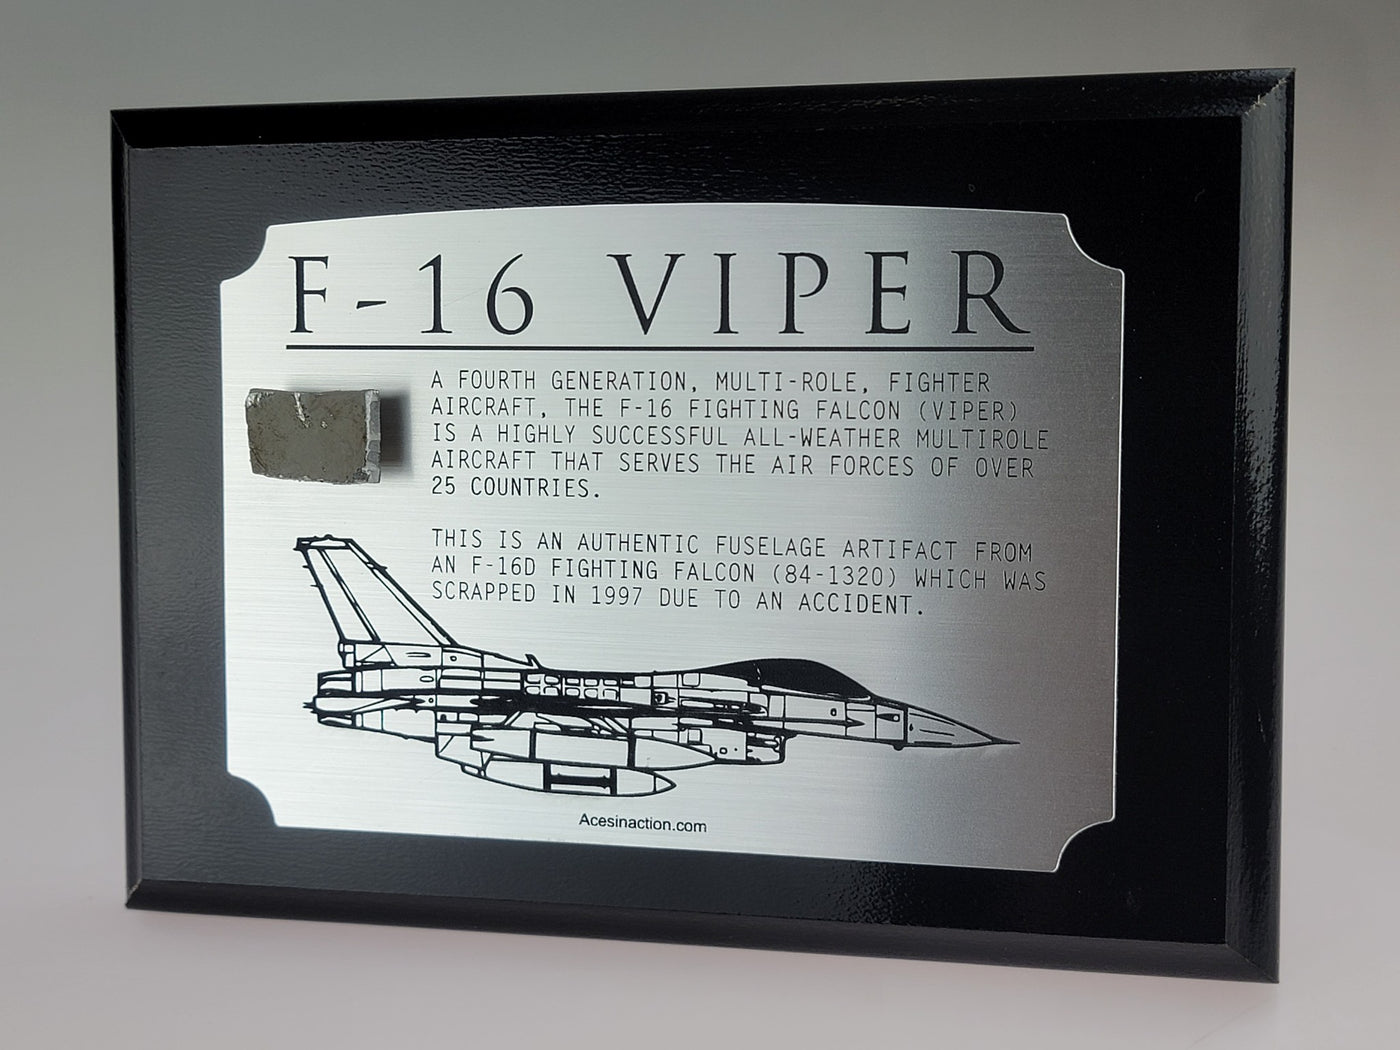 F-16 Viper Authentic Relic Plaque-Historical Display Plaques-Aces In Action: The Workshop of Artist Craig Tinder